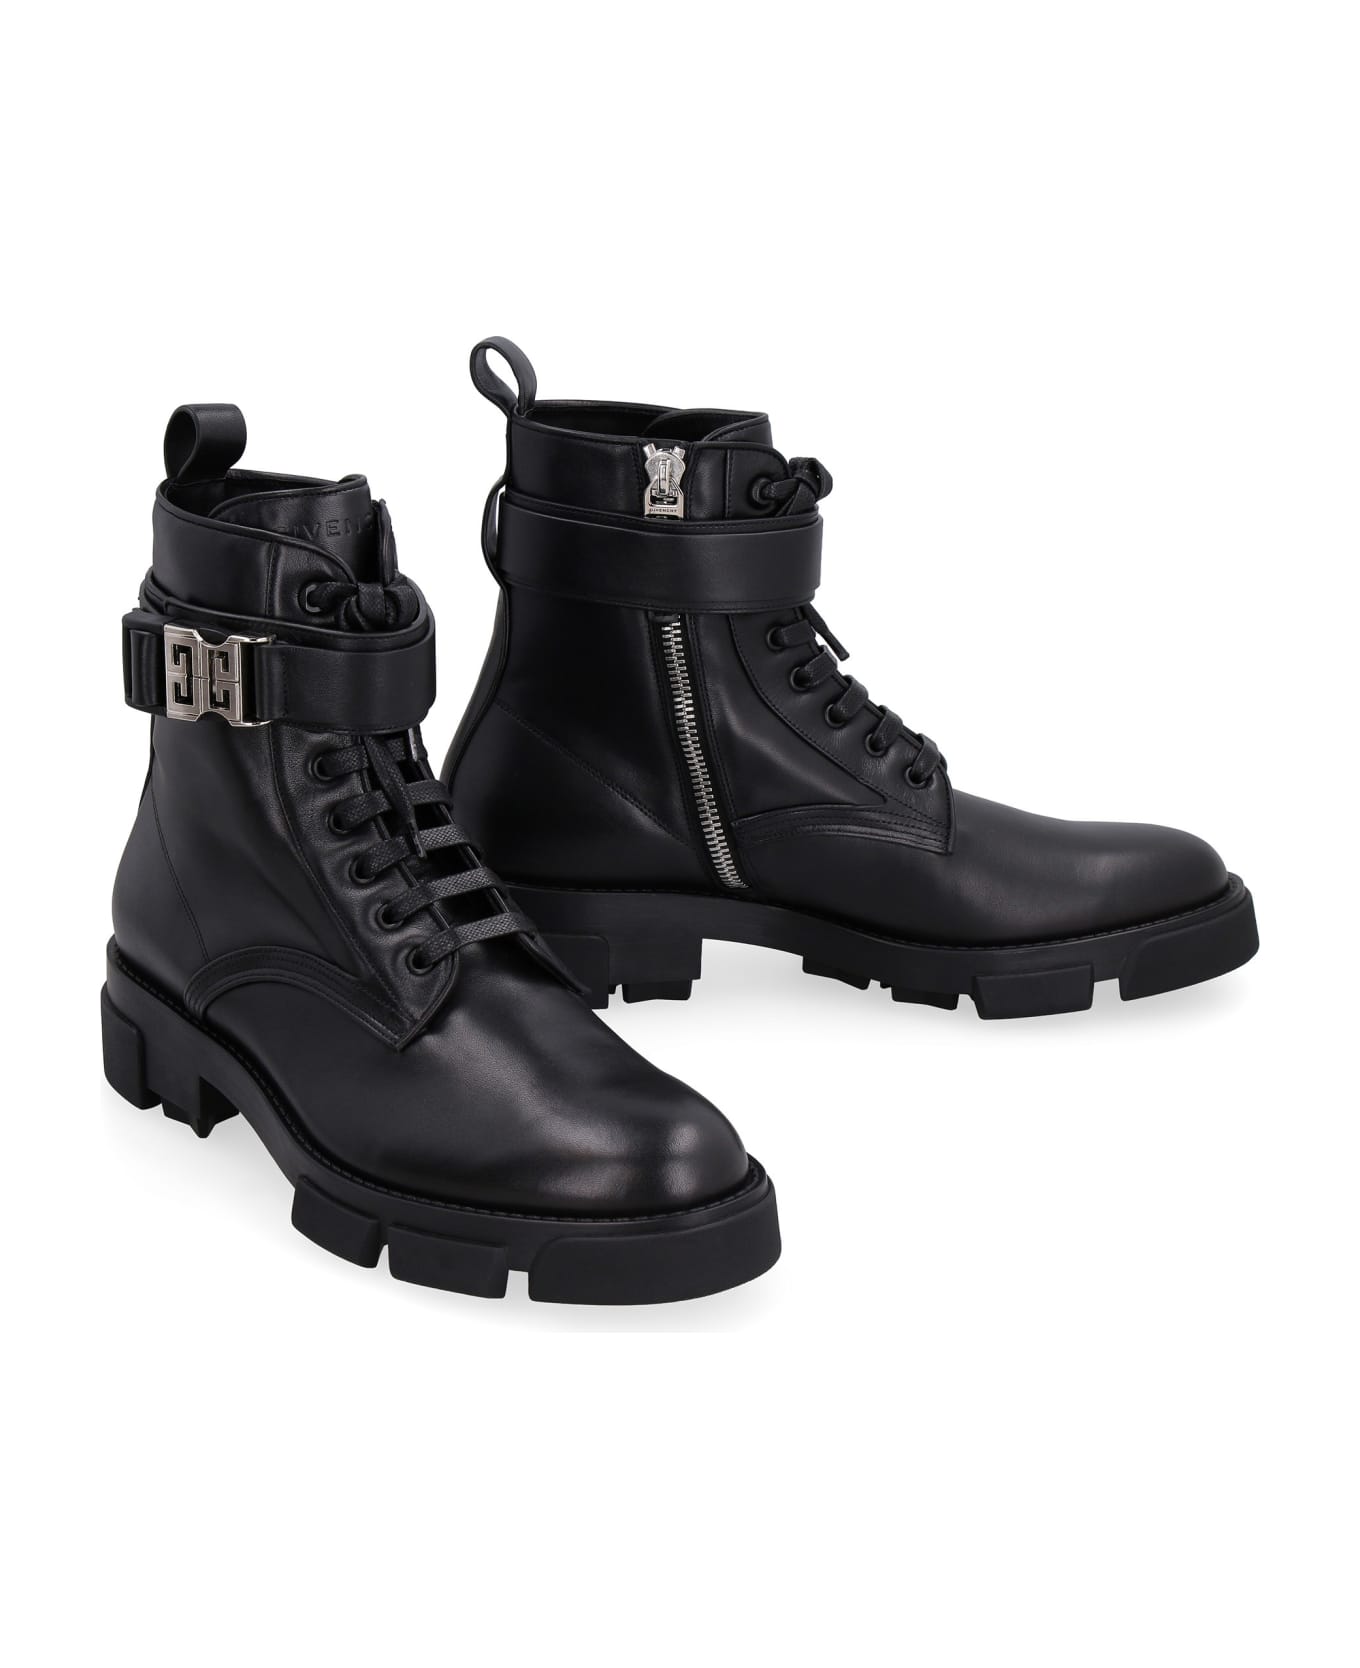 Givenchy Terra Leather Ankle Boots - Black